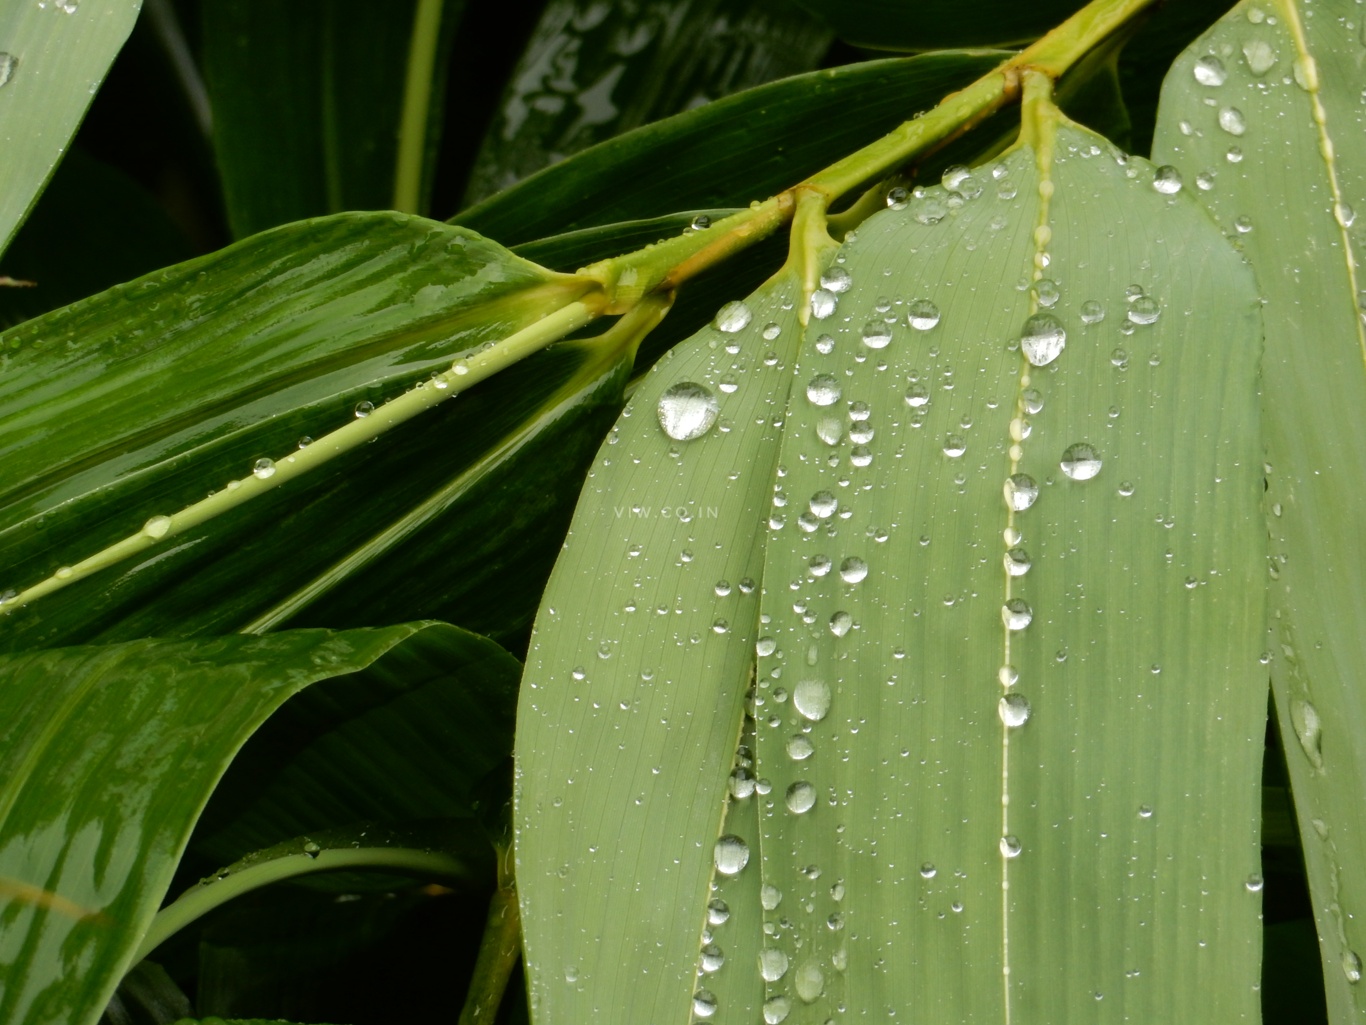 Nature photography- green leaves with rain droplets looks amazing